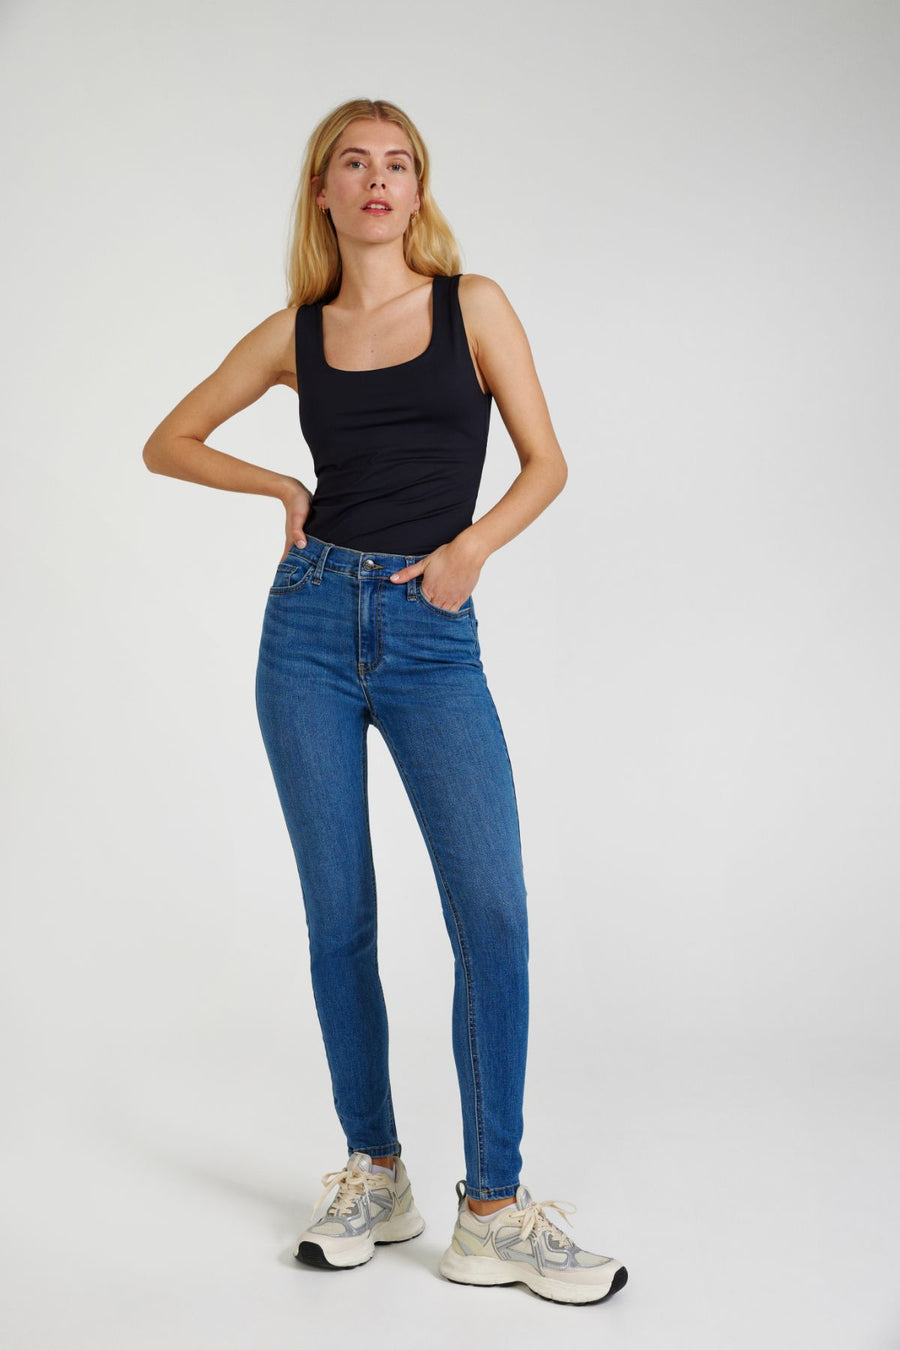 FQHARLOW - JEANS WITH TIGHT FIT - BLUE